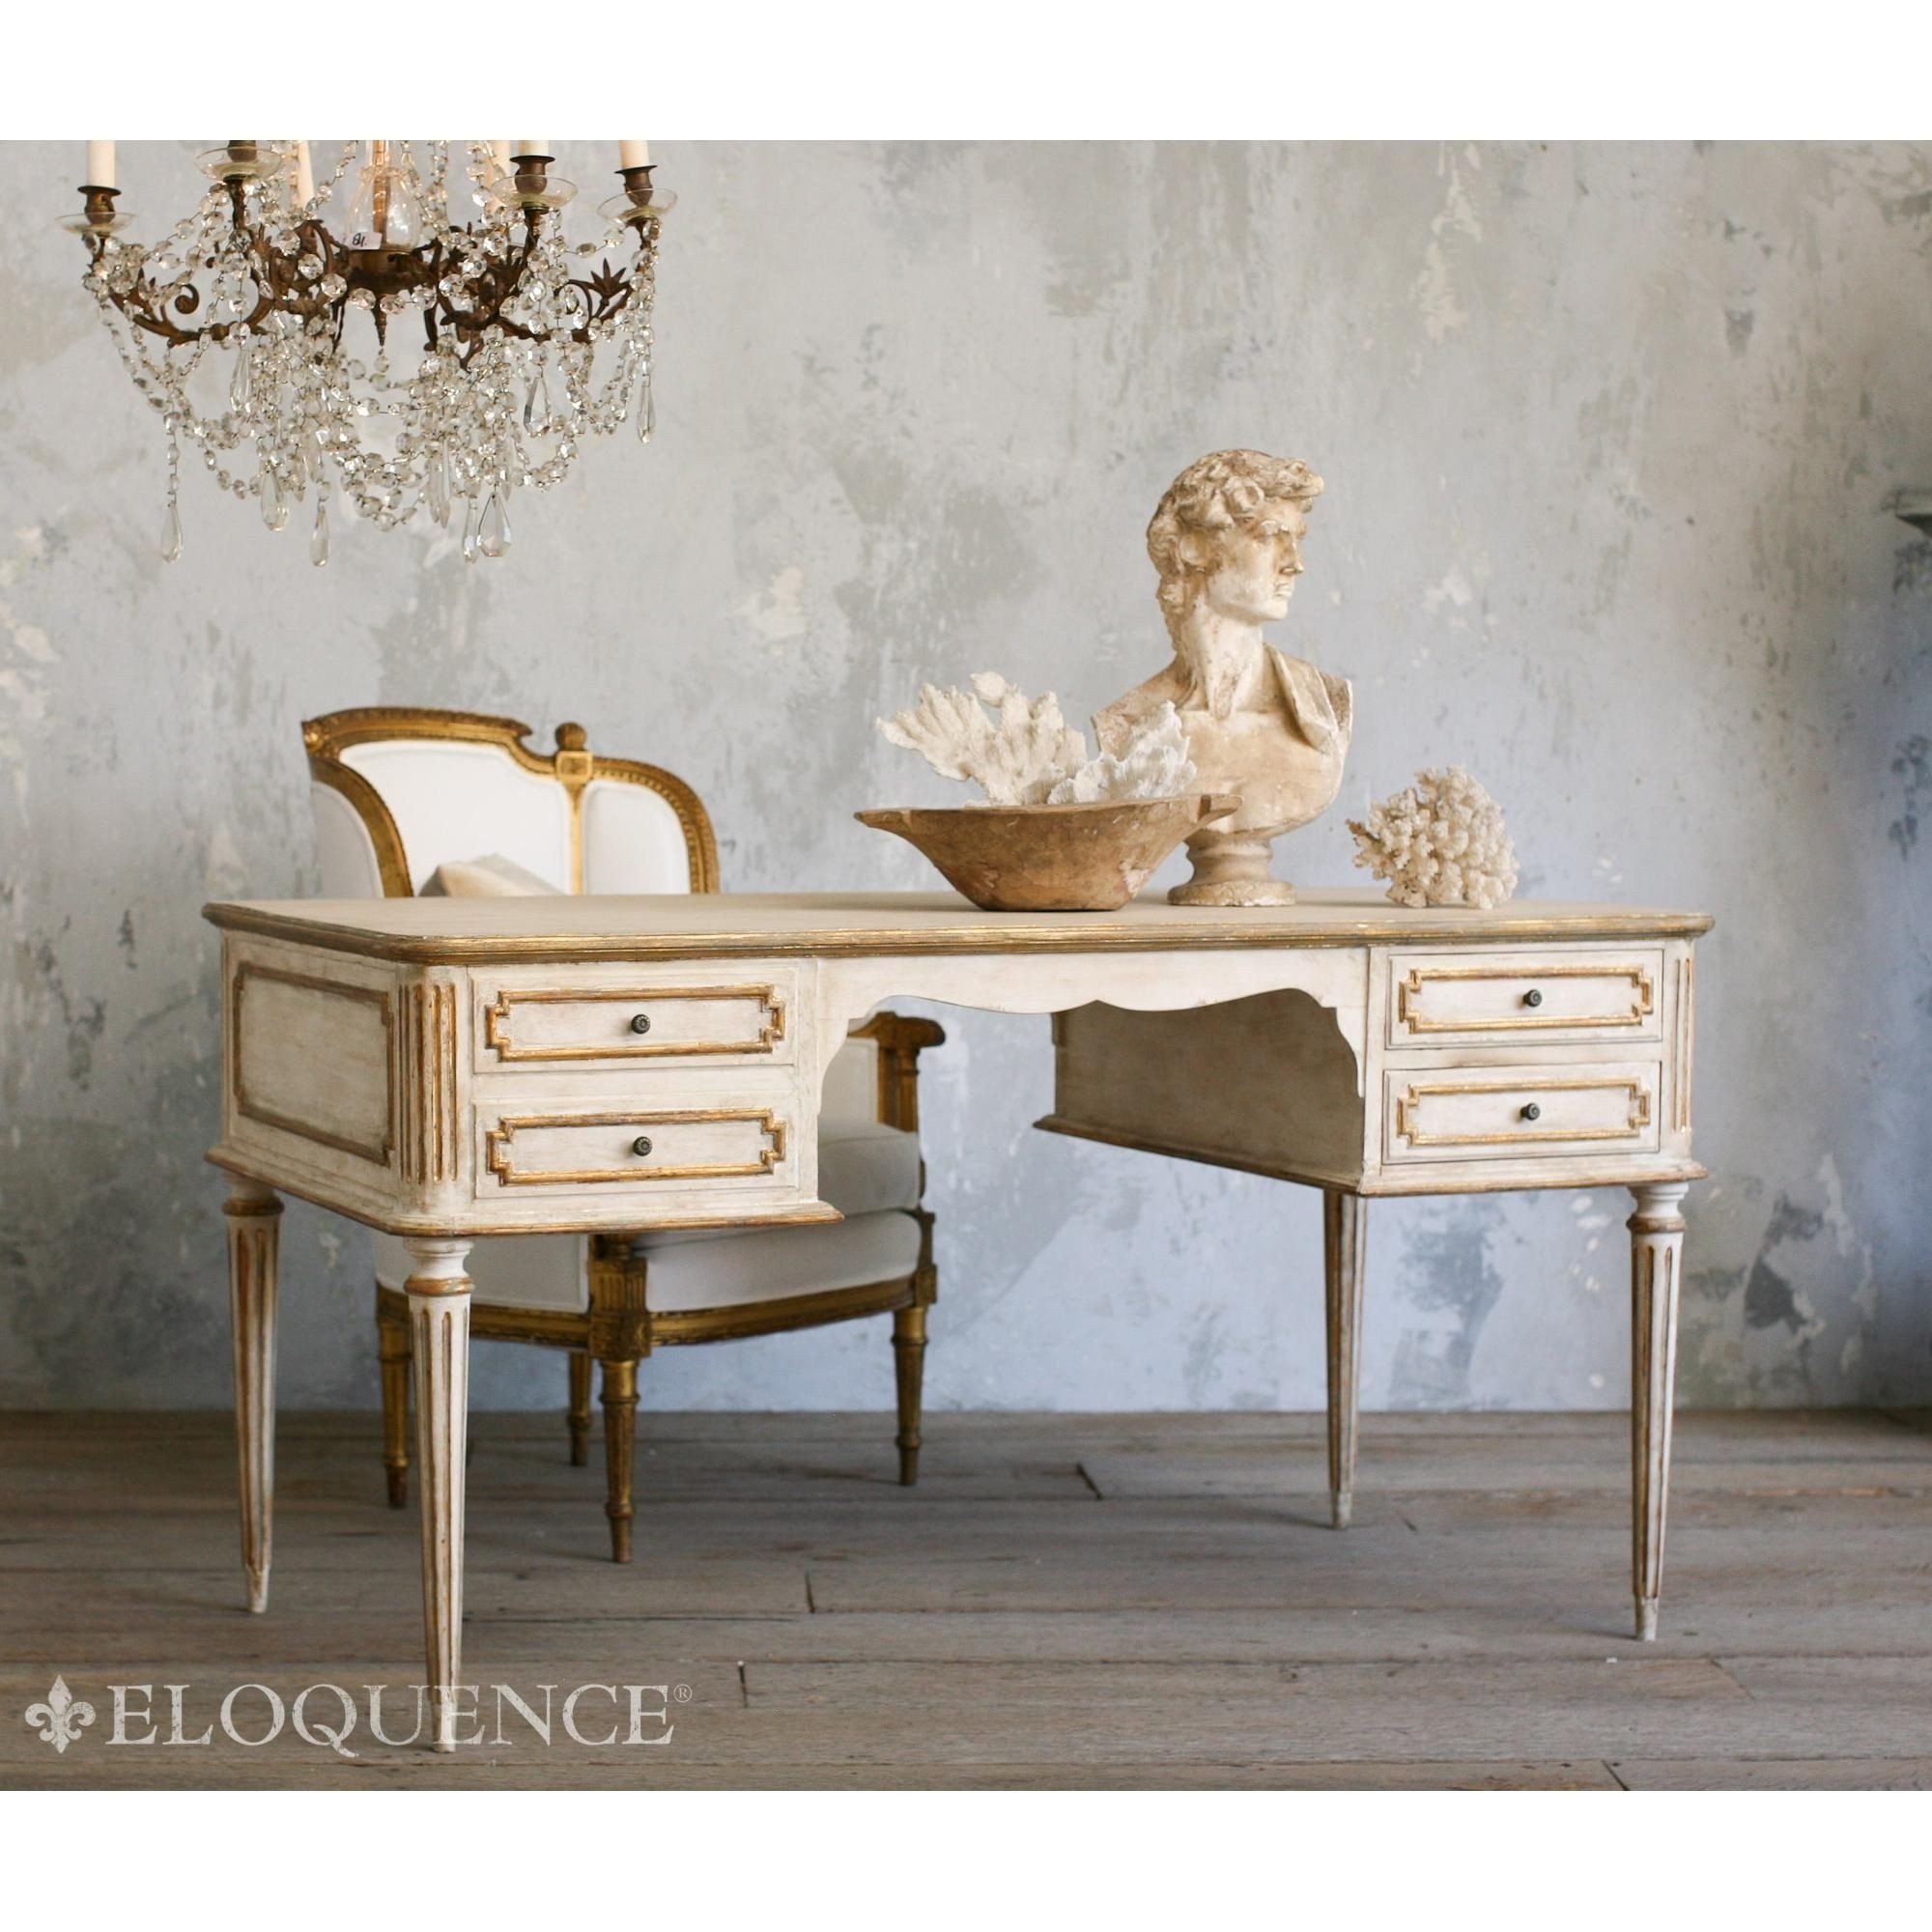 Gorgeous and classic french style desk for your office